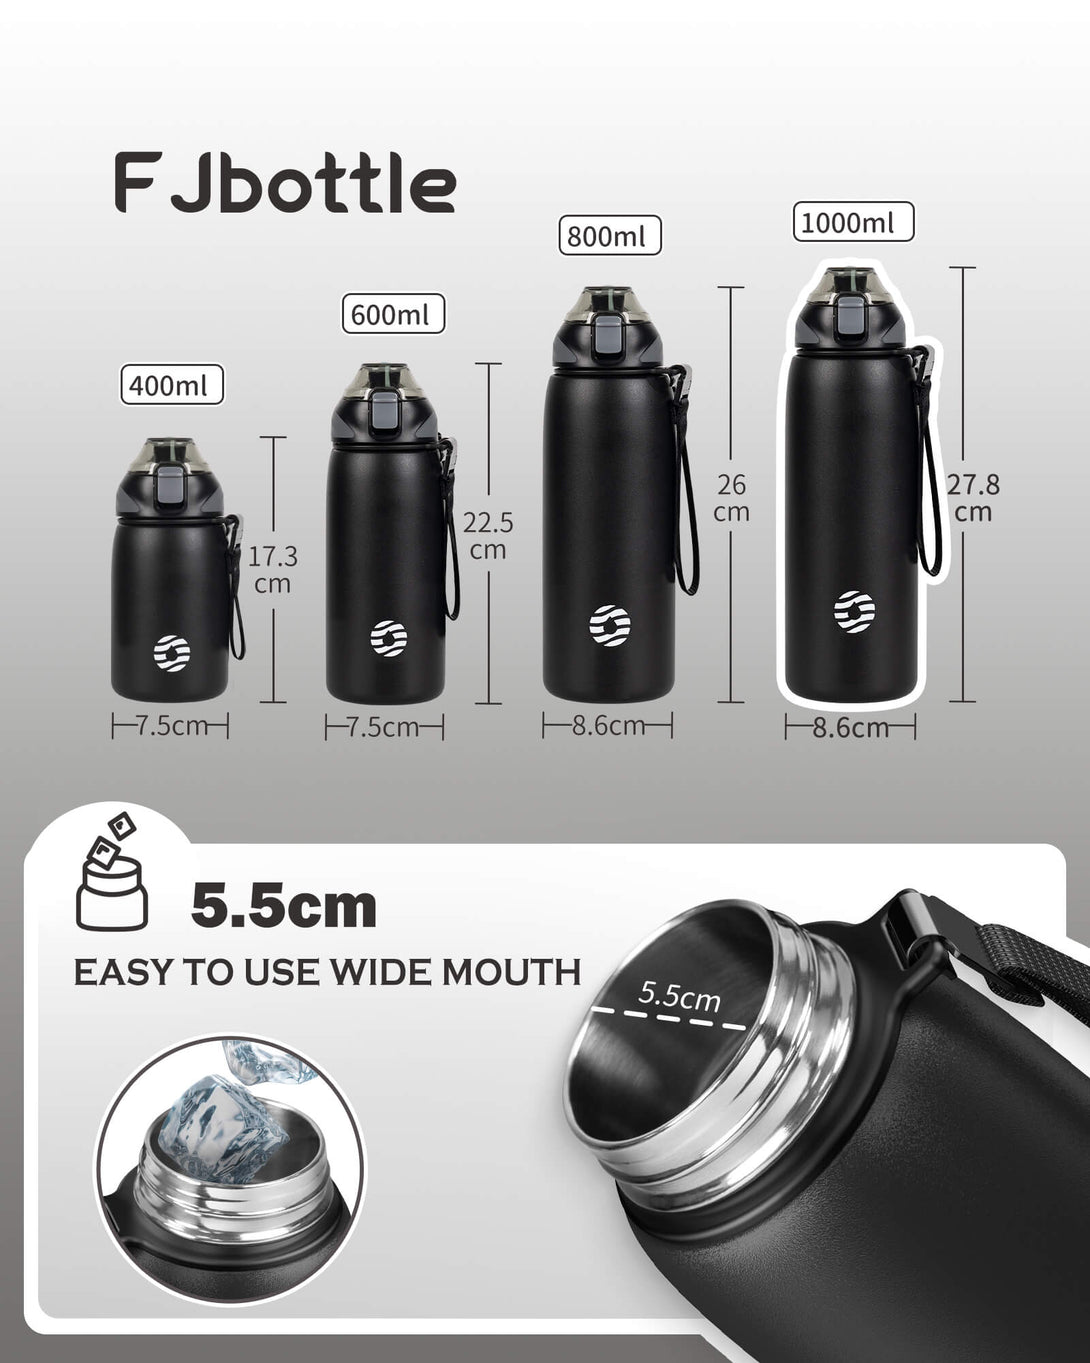 https://www.fjbottle.com/cdn/shop/products/1000ml-vacuum-insulated-water-bottle-with-carrying-bag-black1000ml-vacuum-insulated-water-bottle-with-carrying-bag-black-762934.jpg?v=1692859509&width=1090